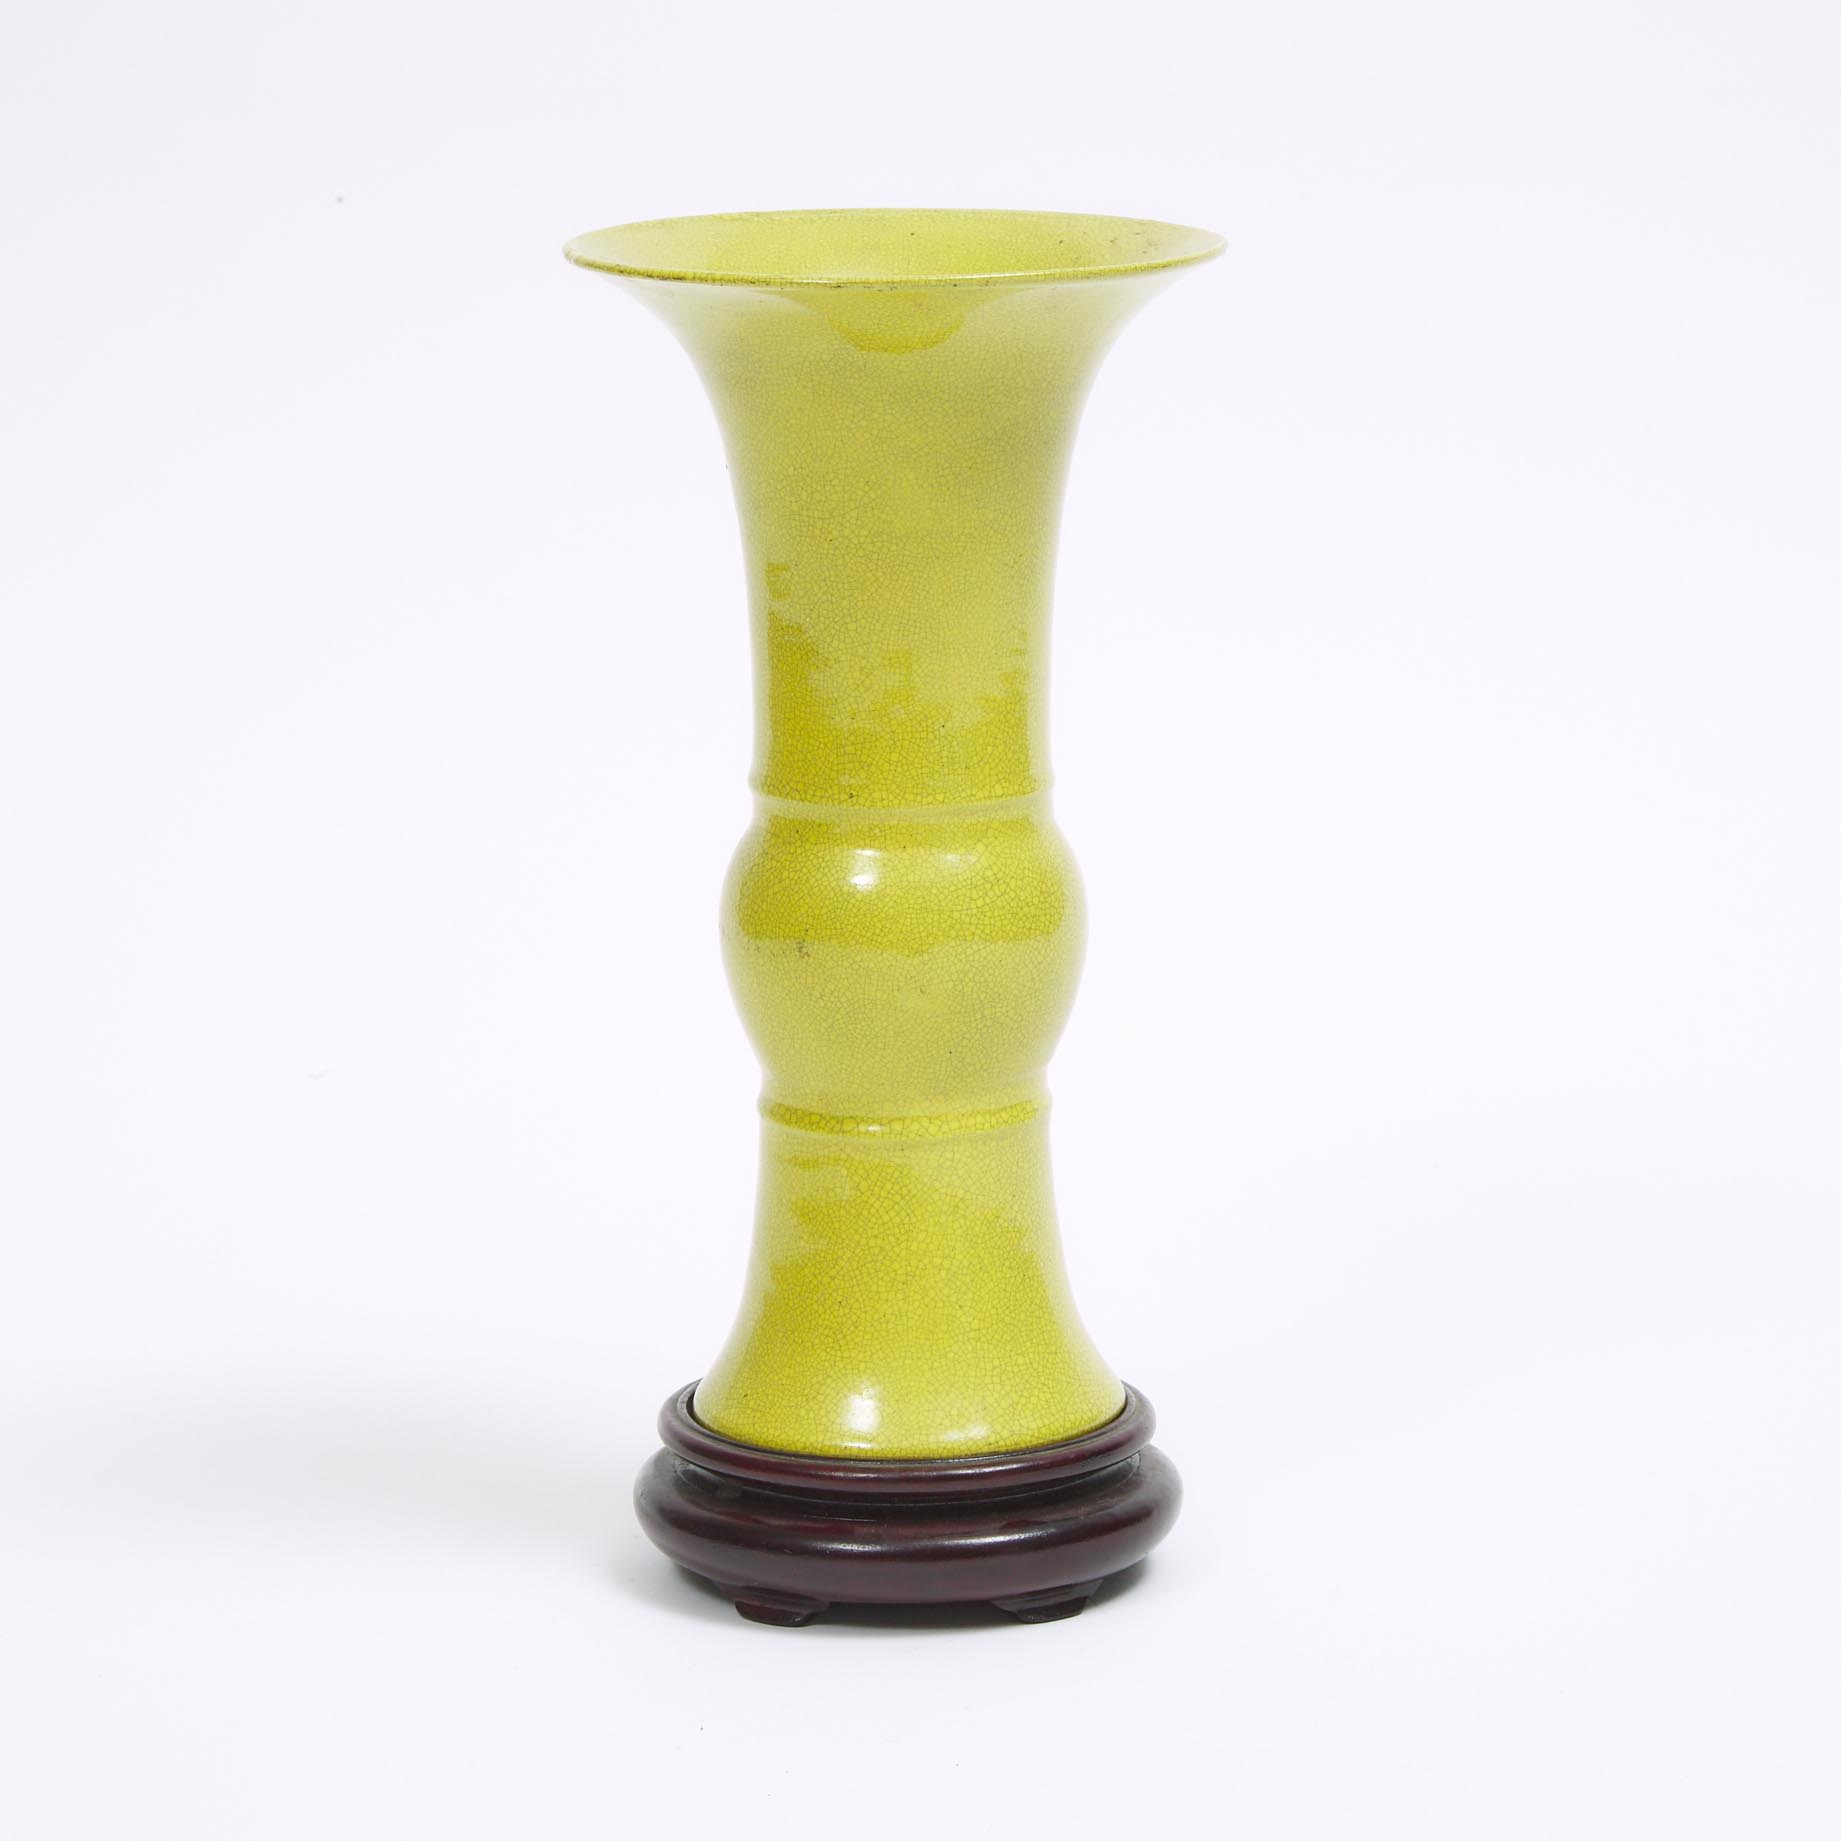 A Yellow Crackle-Glazed 'Gu' Vase, 19th Century or Later